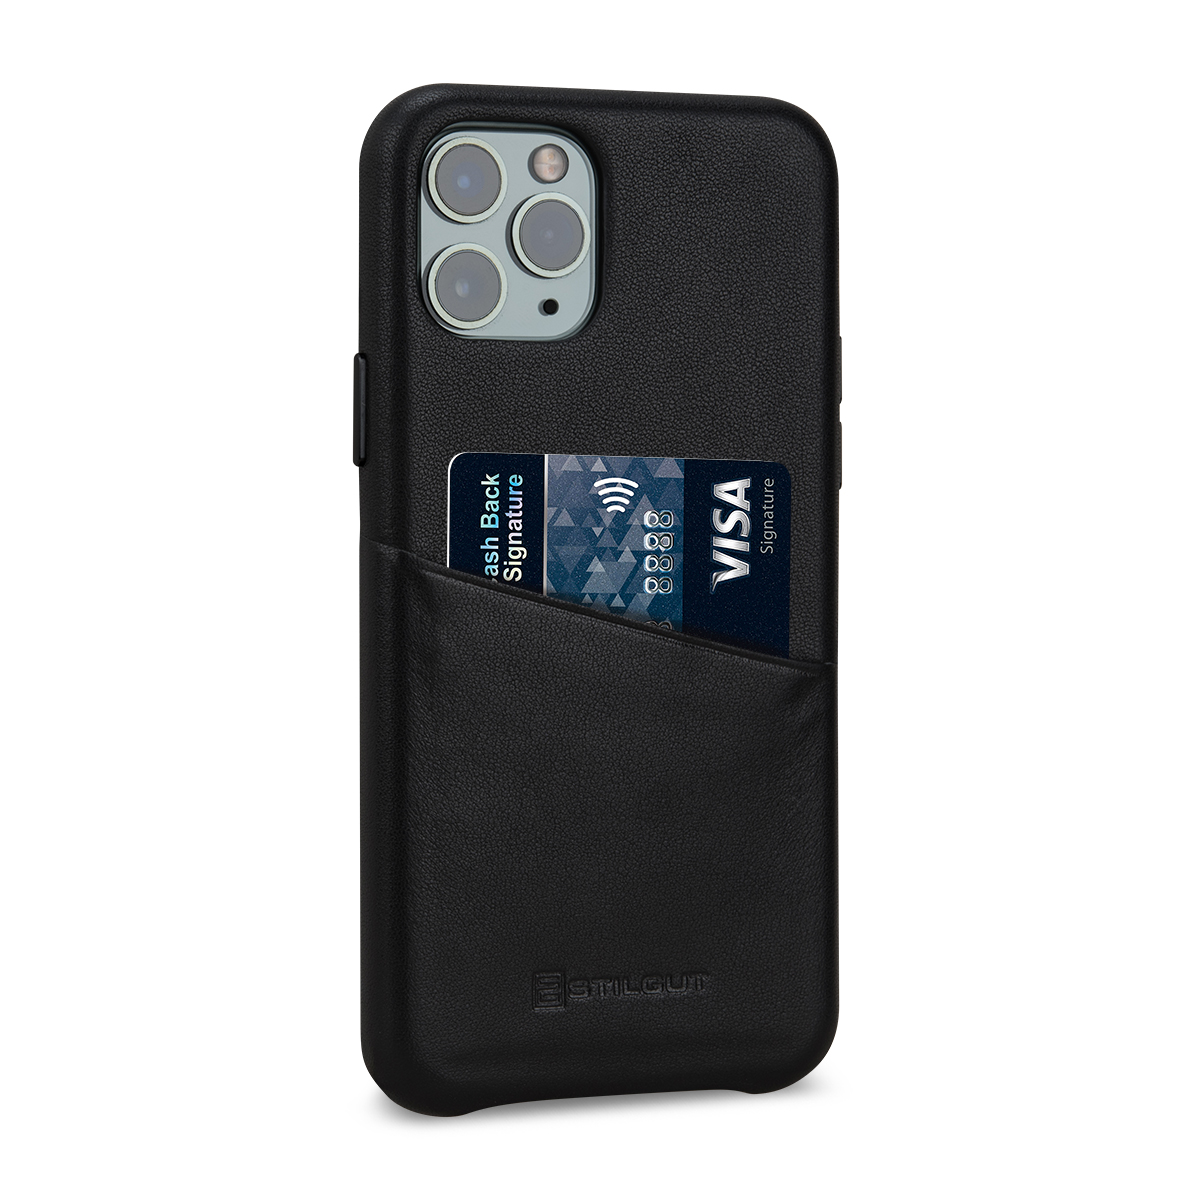 iPhone 11 Flip Case Cover for iPhone 11 Leather Extra-Shockproof Business Cell Phone case Card Holders Kickstand with Free